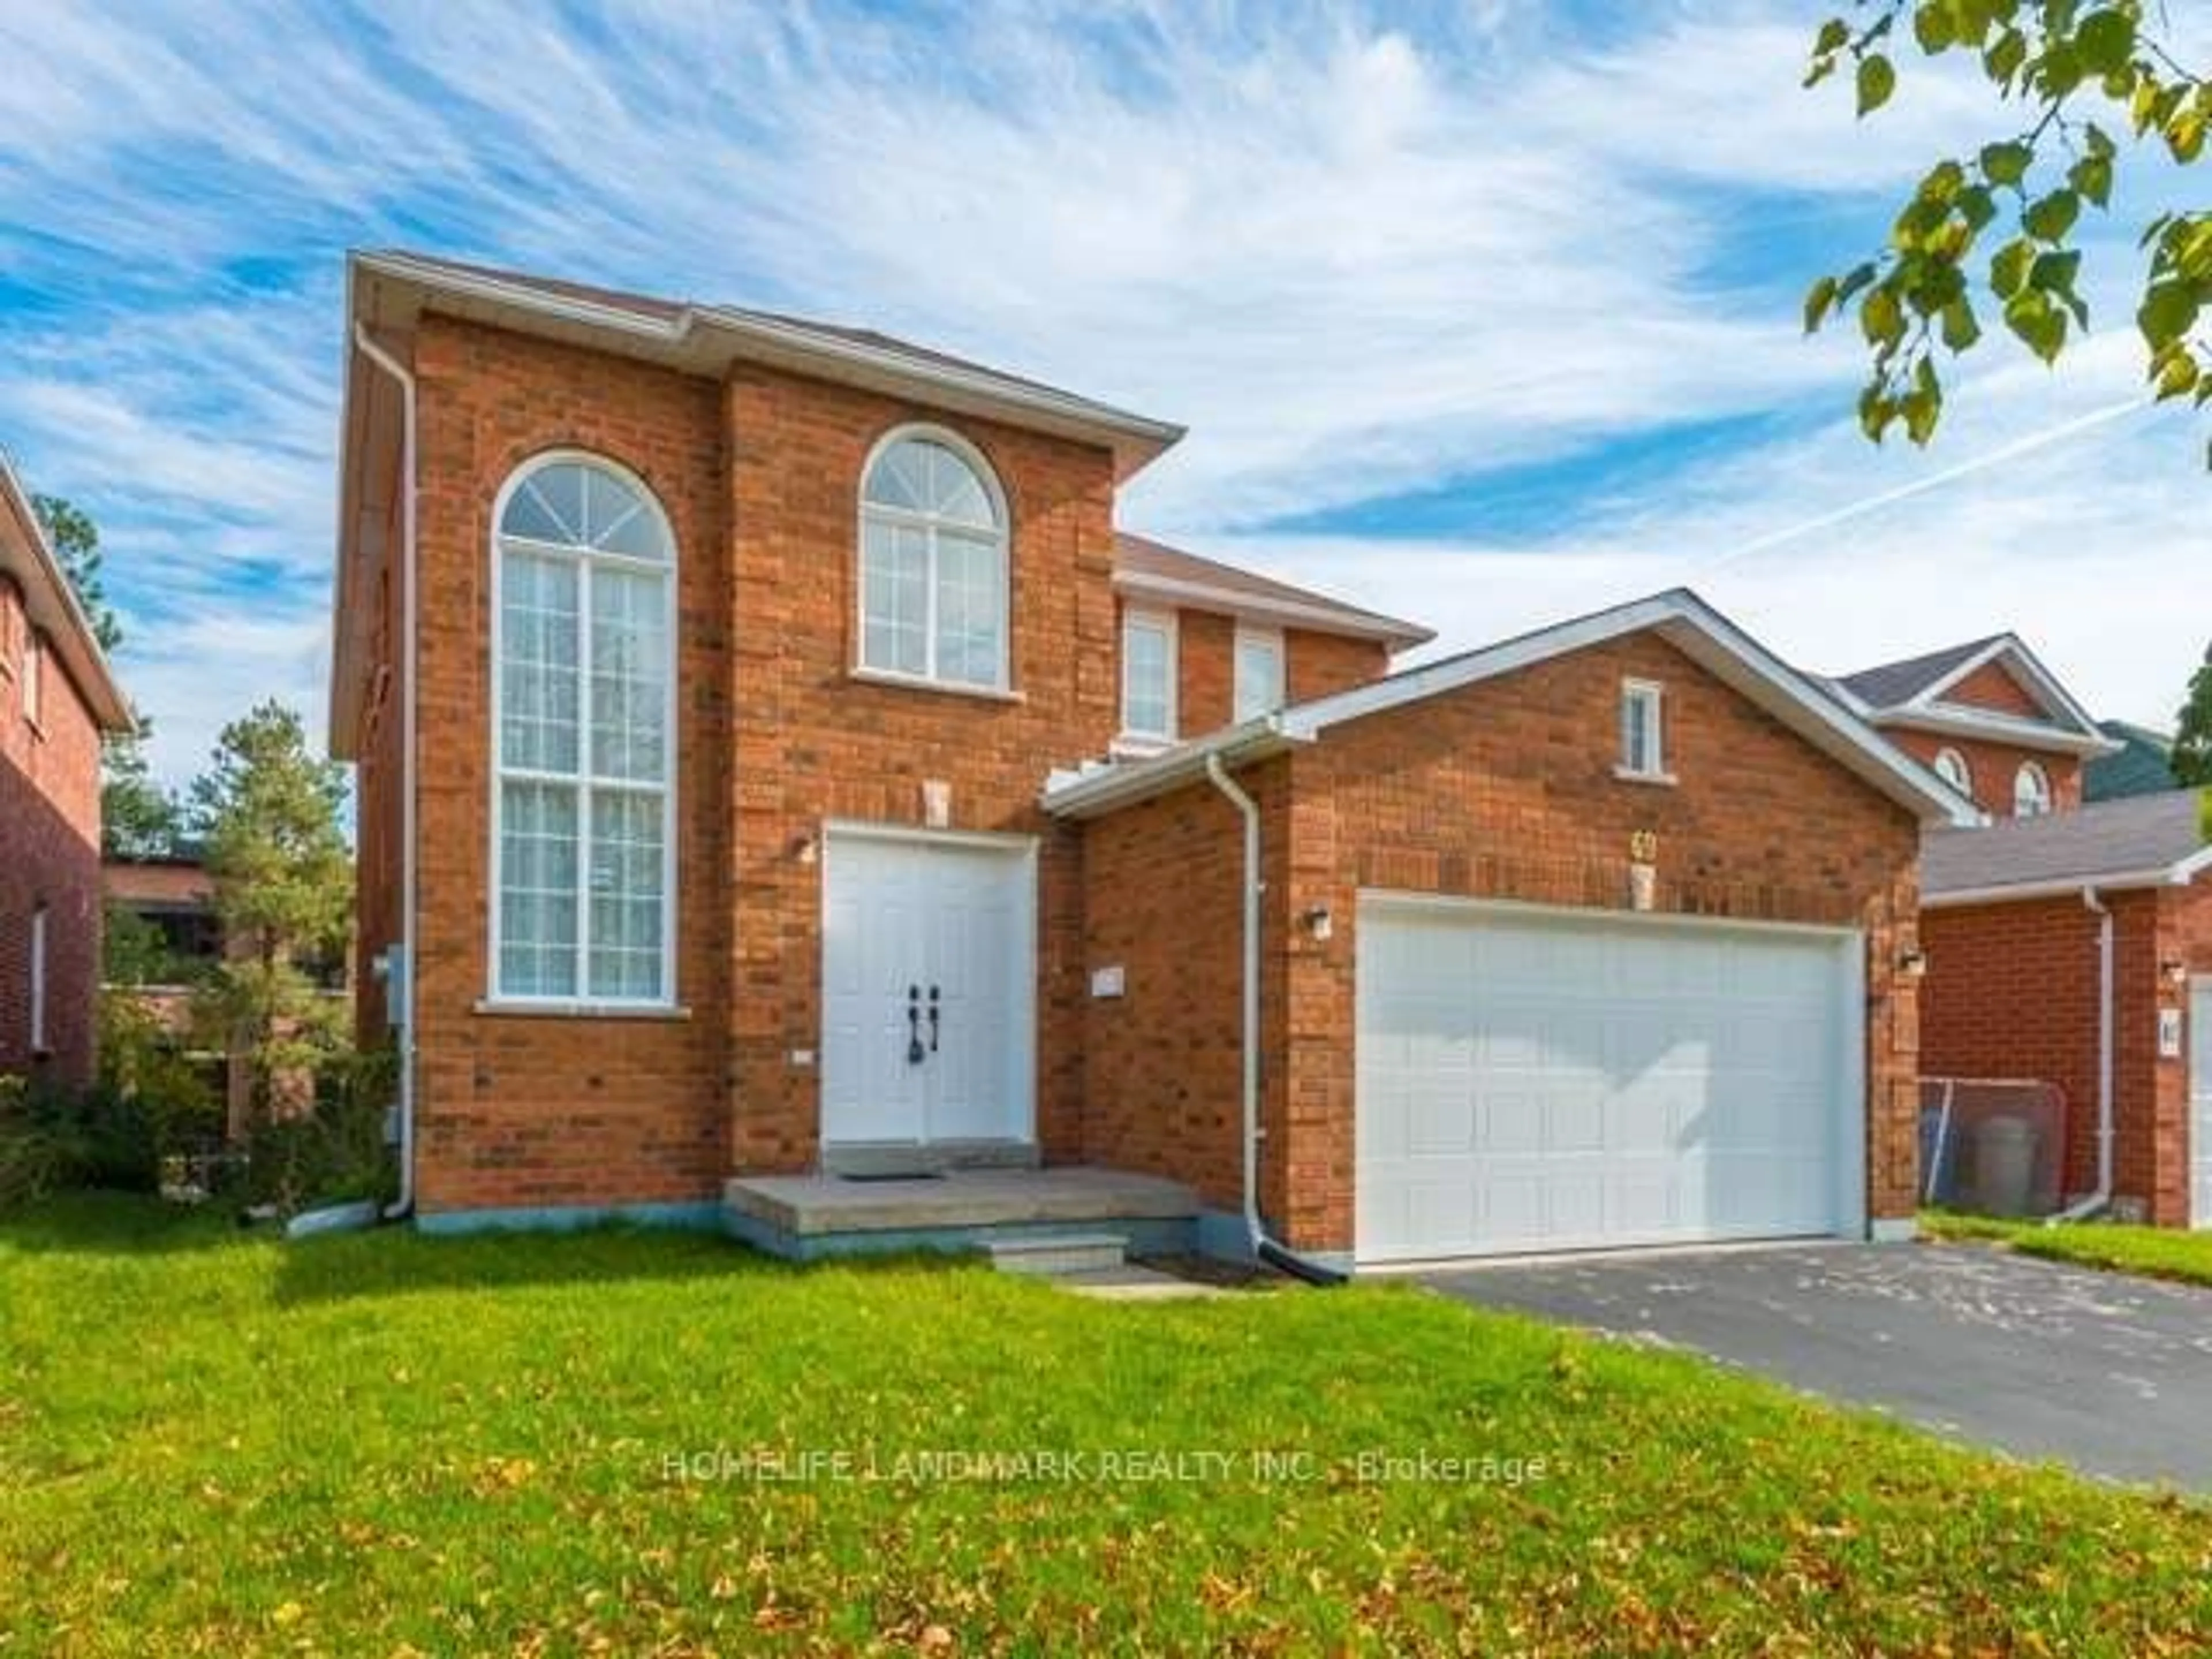 Home with brick exterior material for 69 Aristotle Dr, Richmond Hill Ontario L4S 1J7